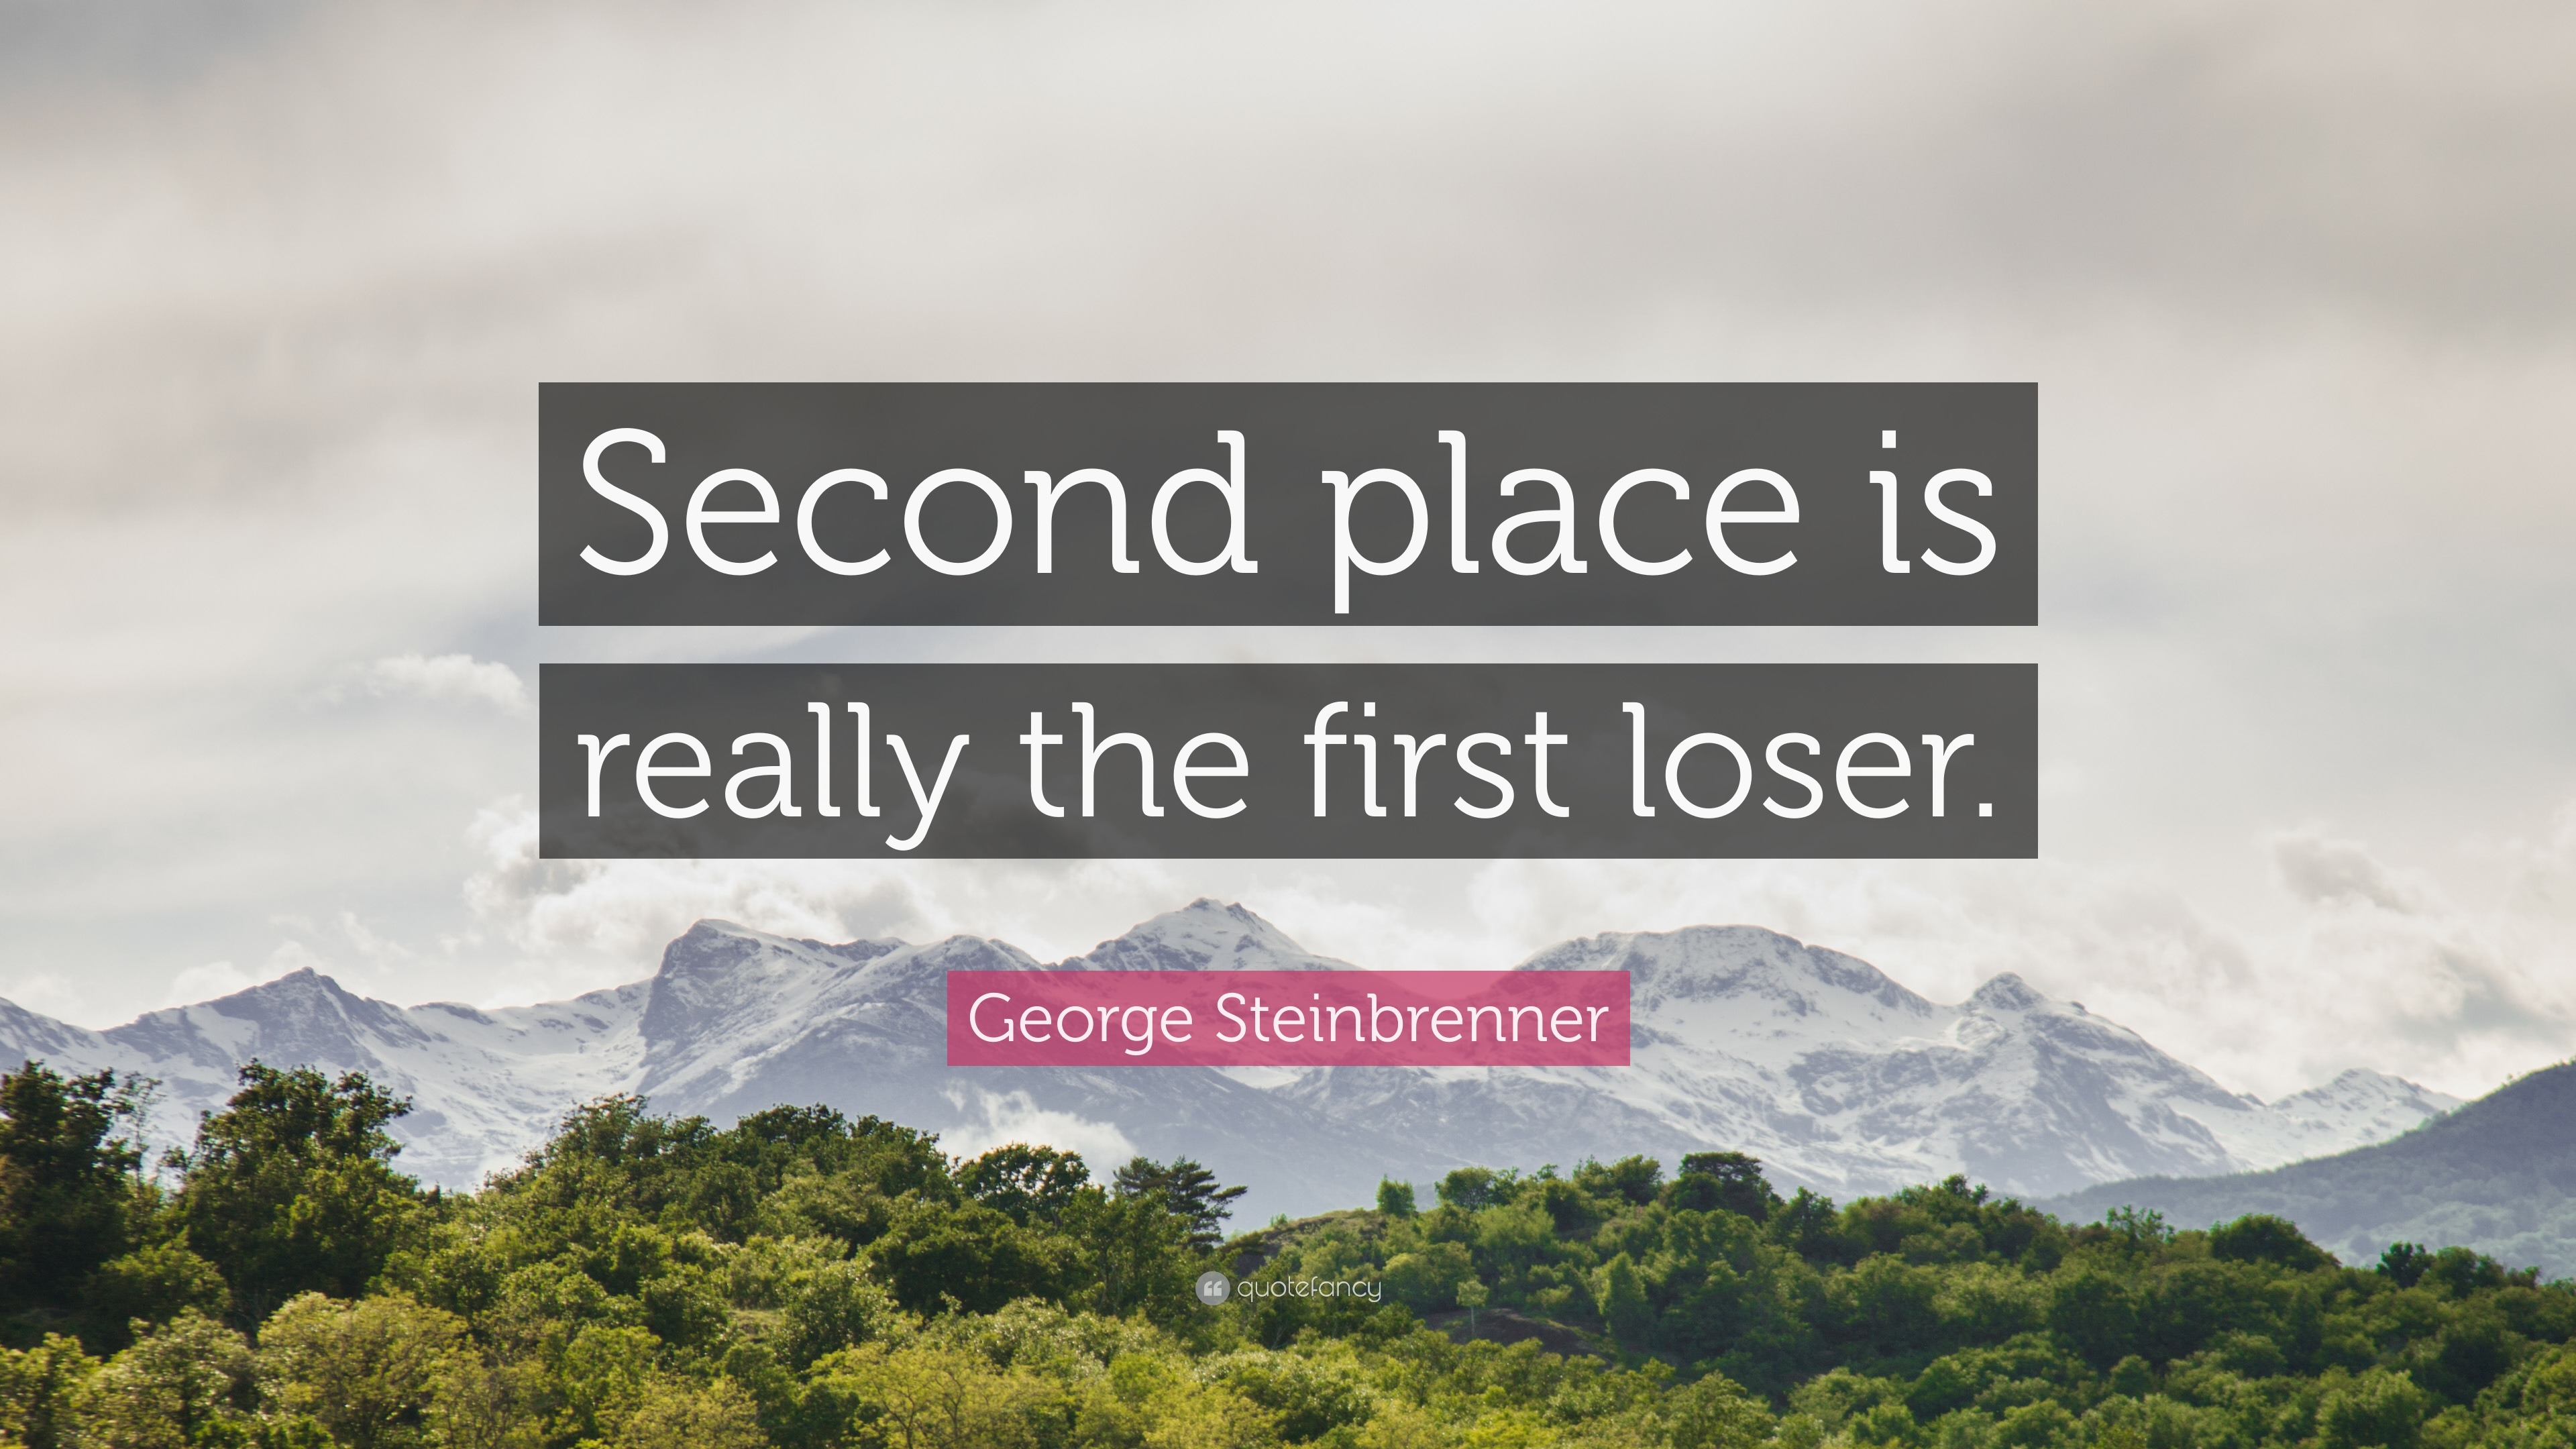 George Steinbrenner Quote: “Second place is really the first loser.” (7